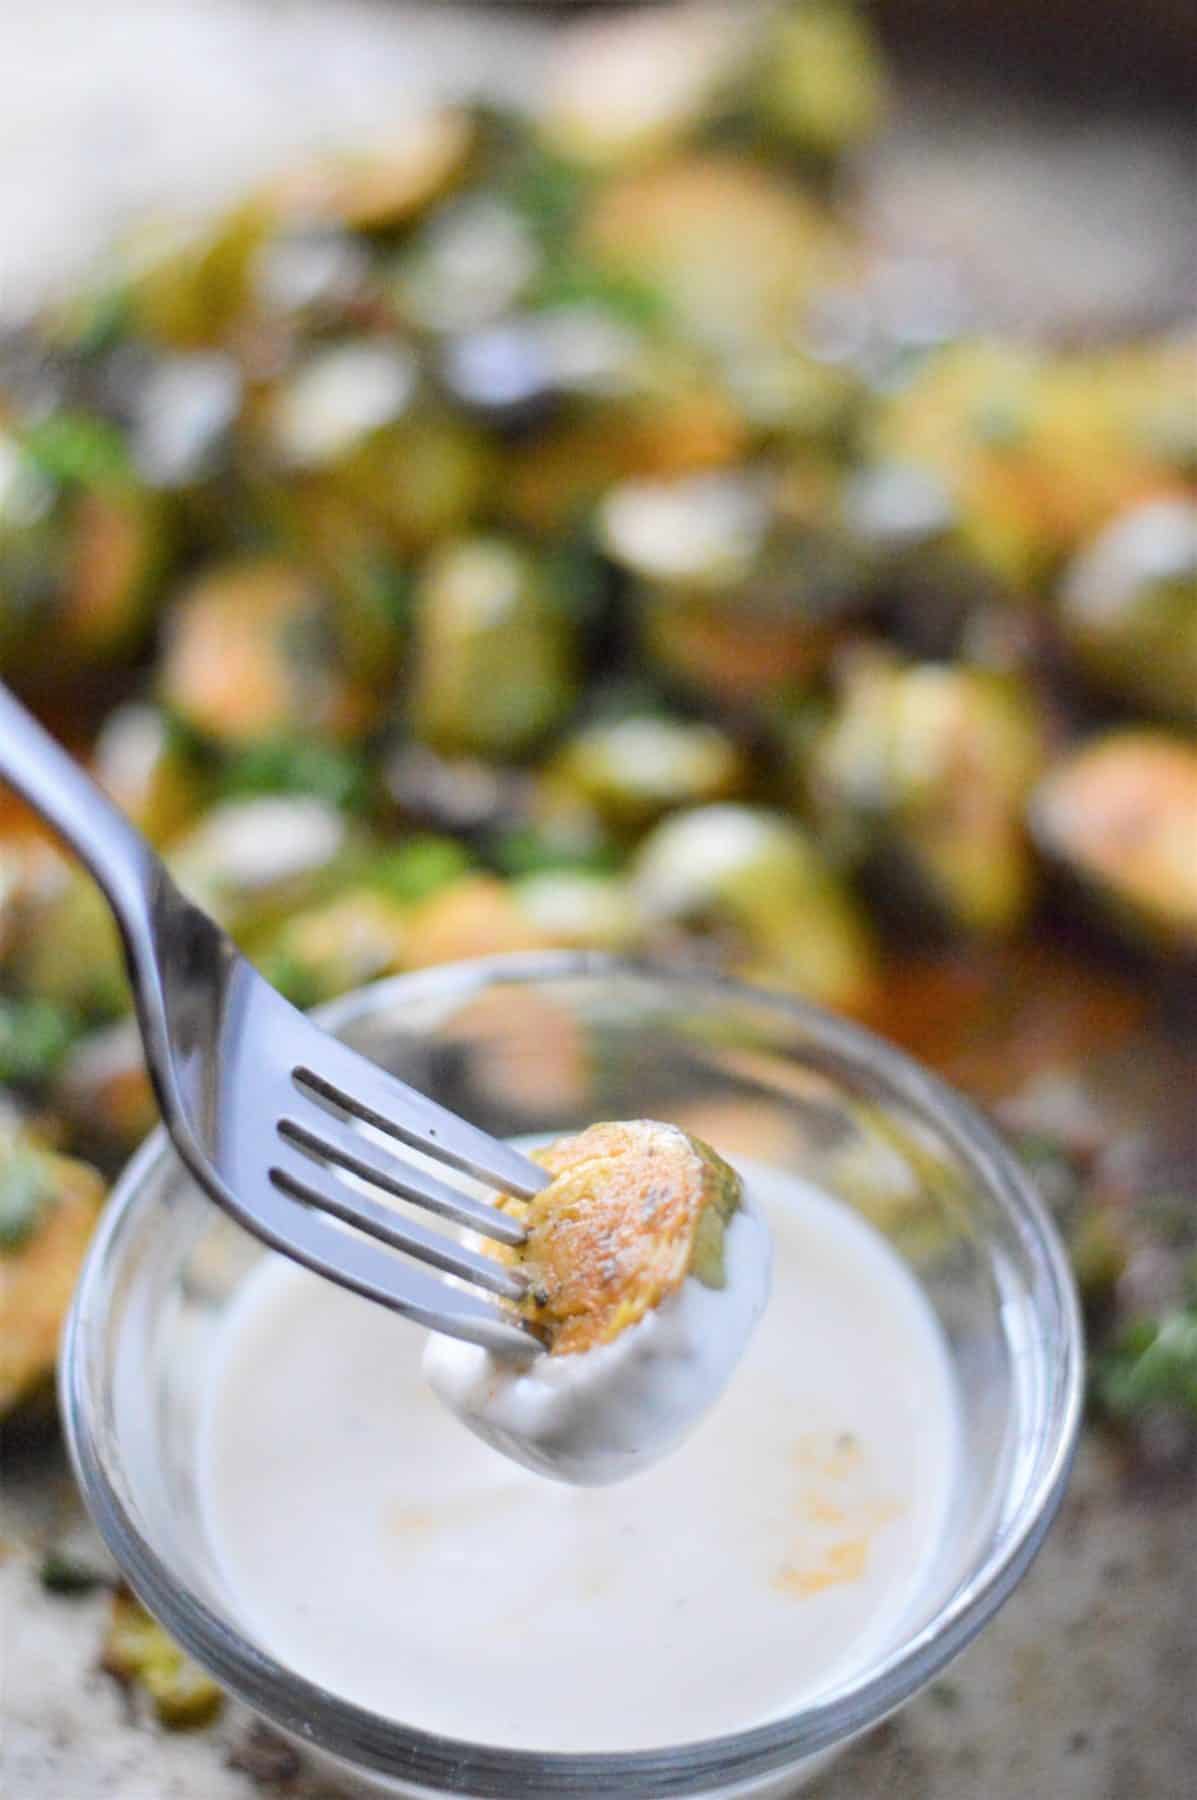 Buffalo Ranch Brussel Sprouts on fork dipped in ranch dressing